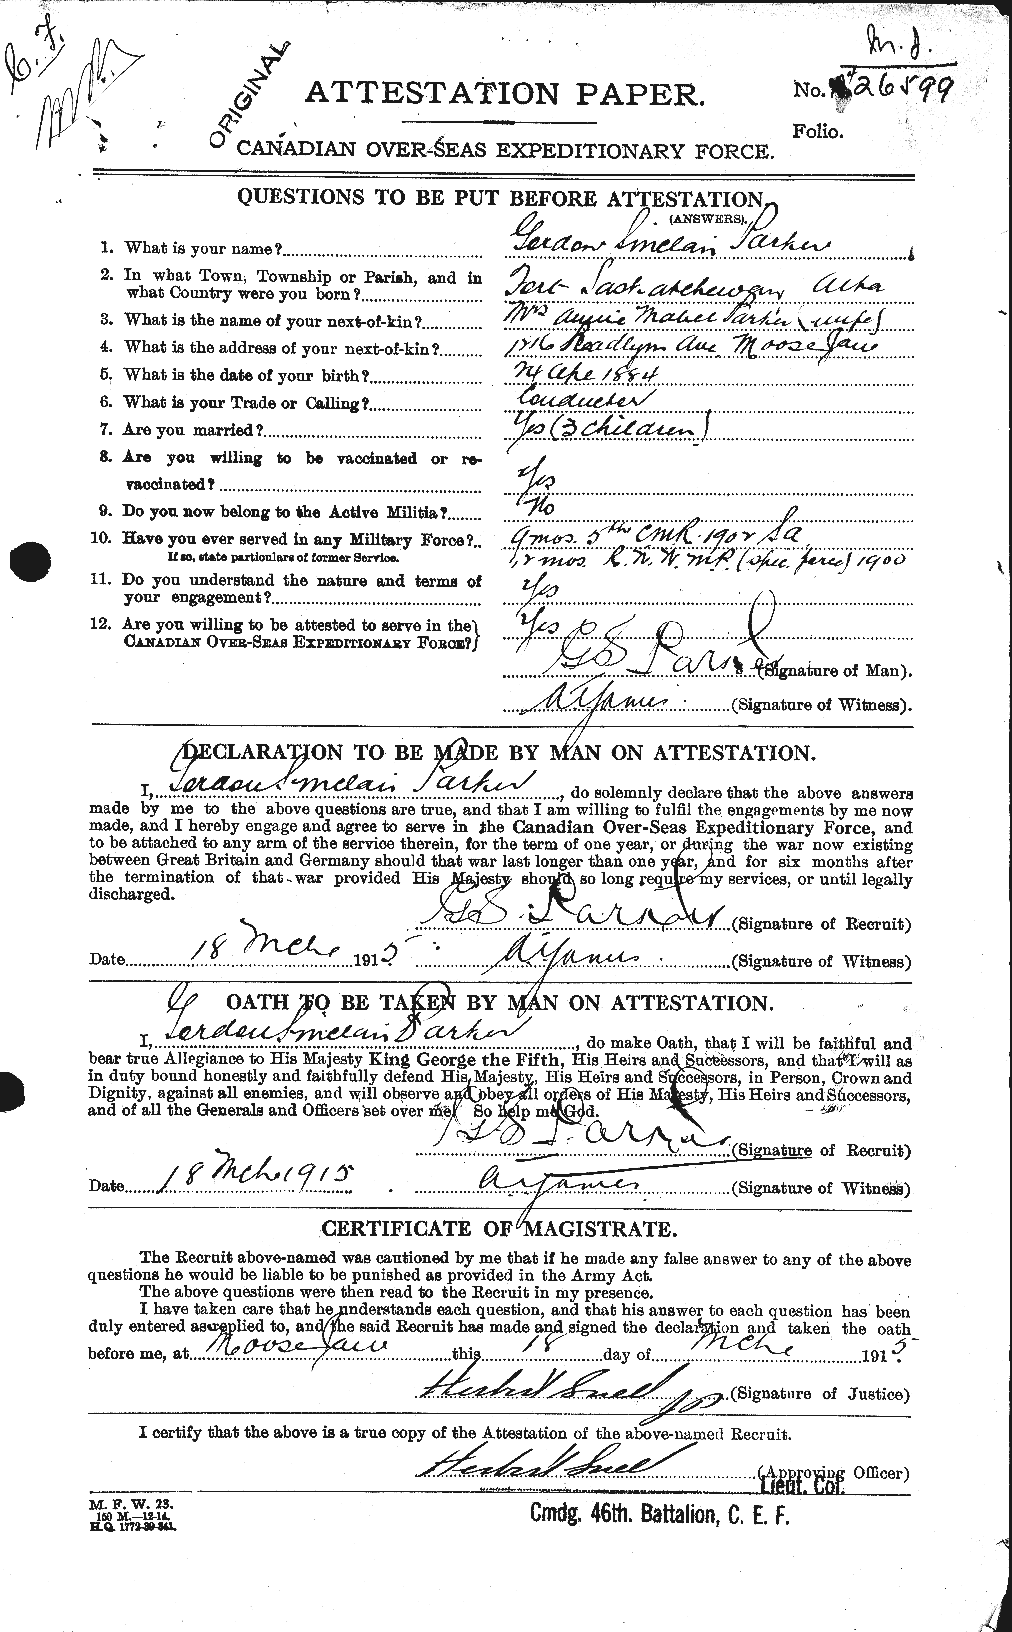 Personnel Records of the First World War - CEF 565297a